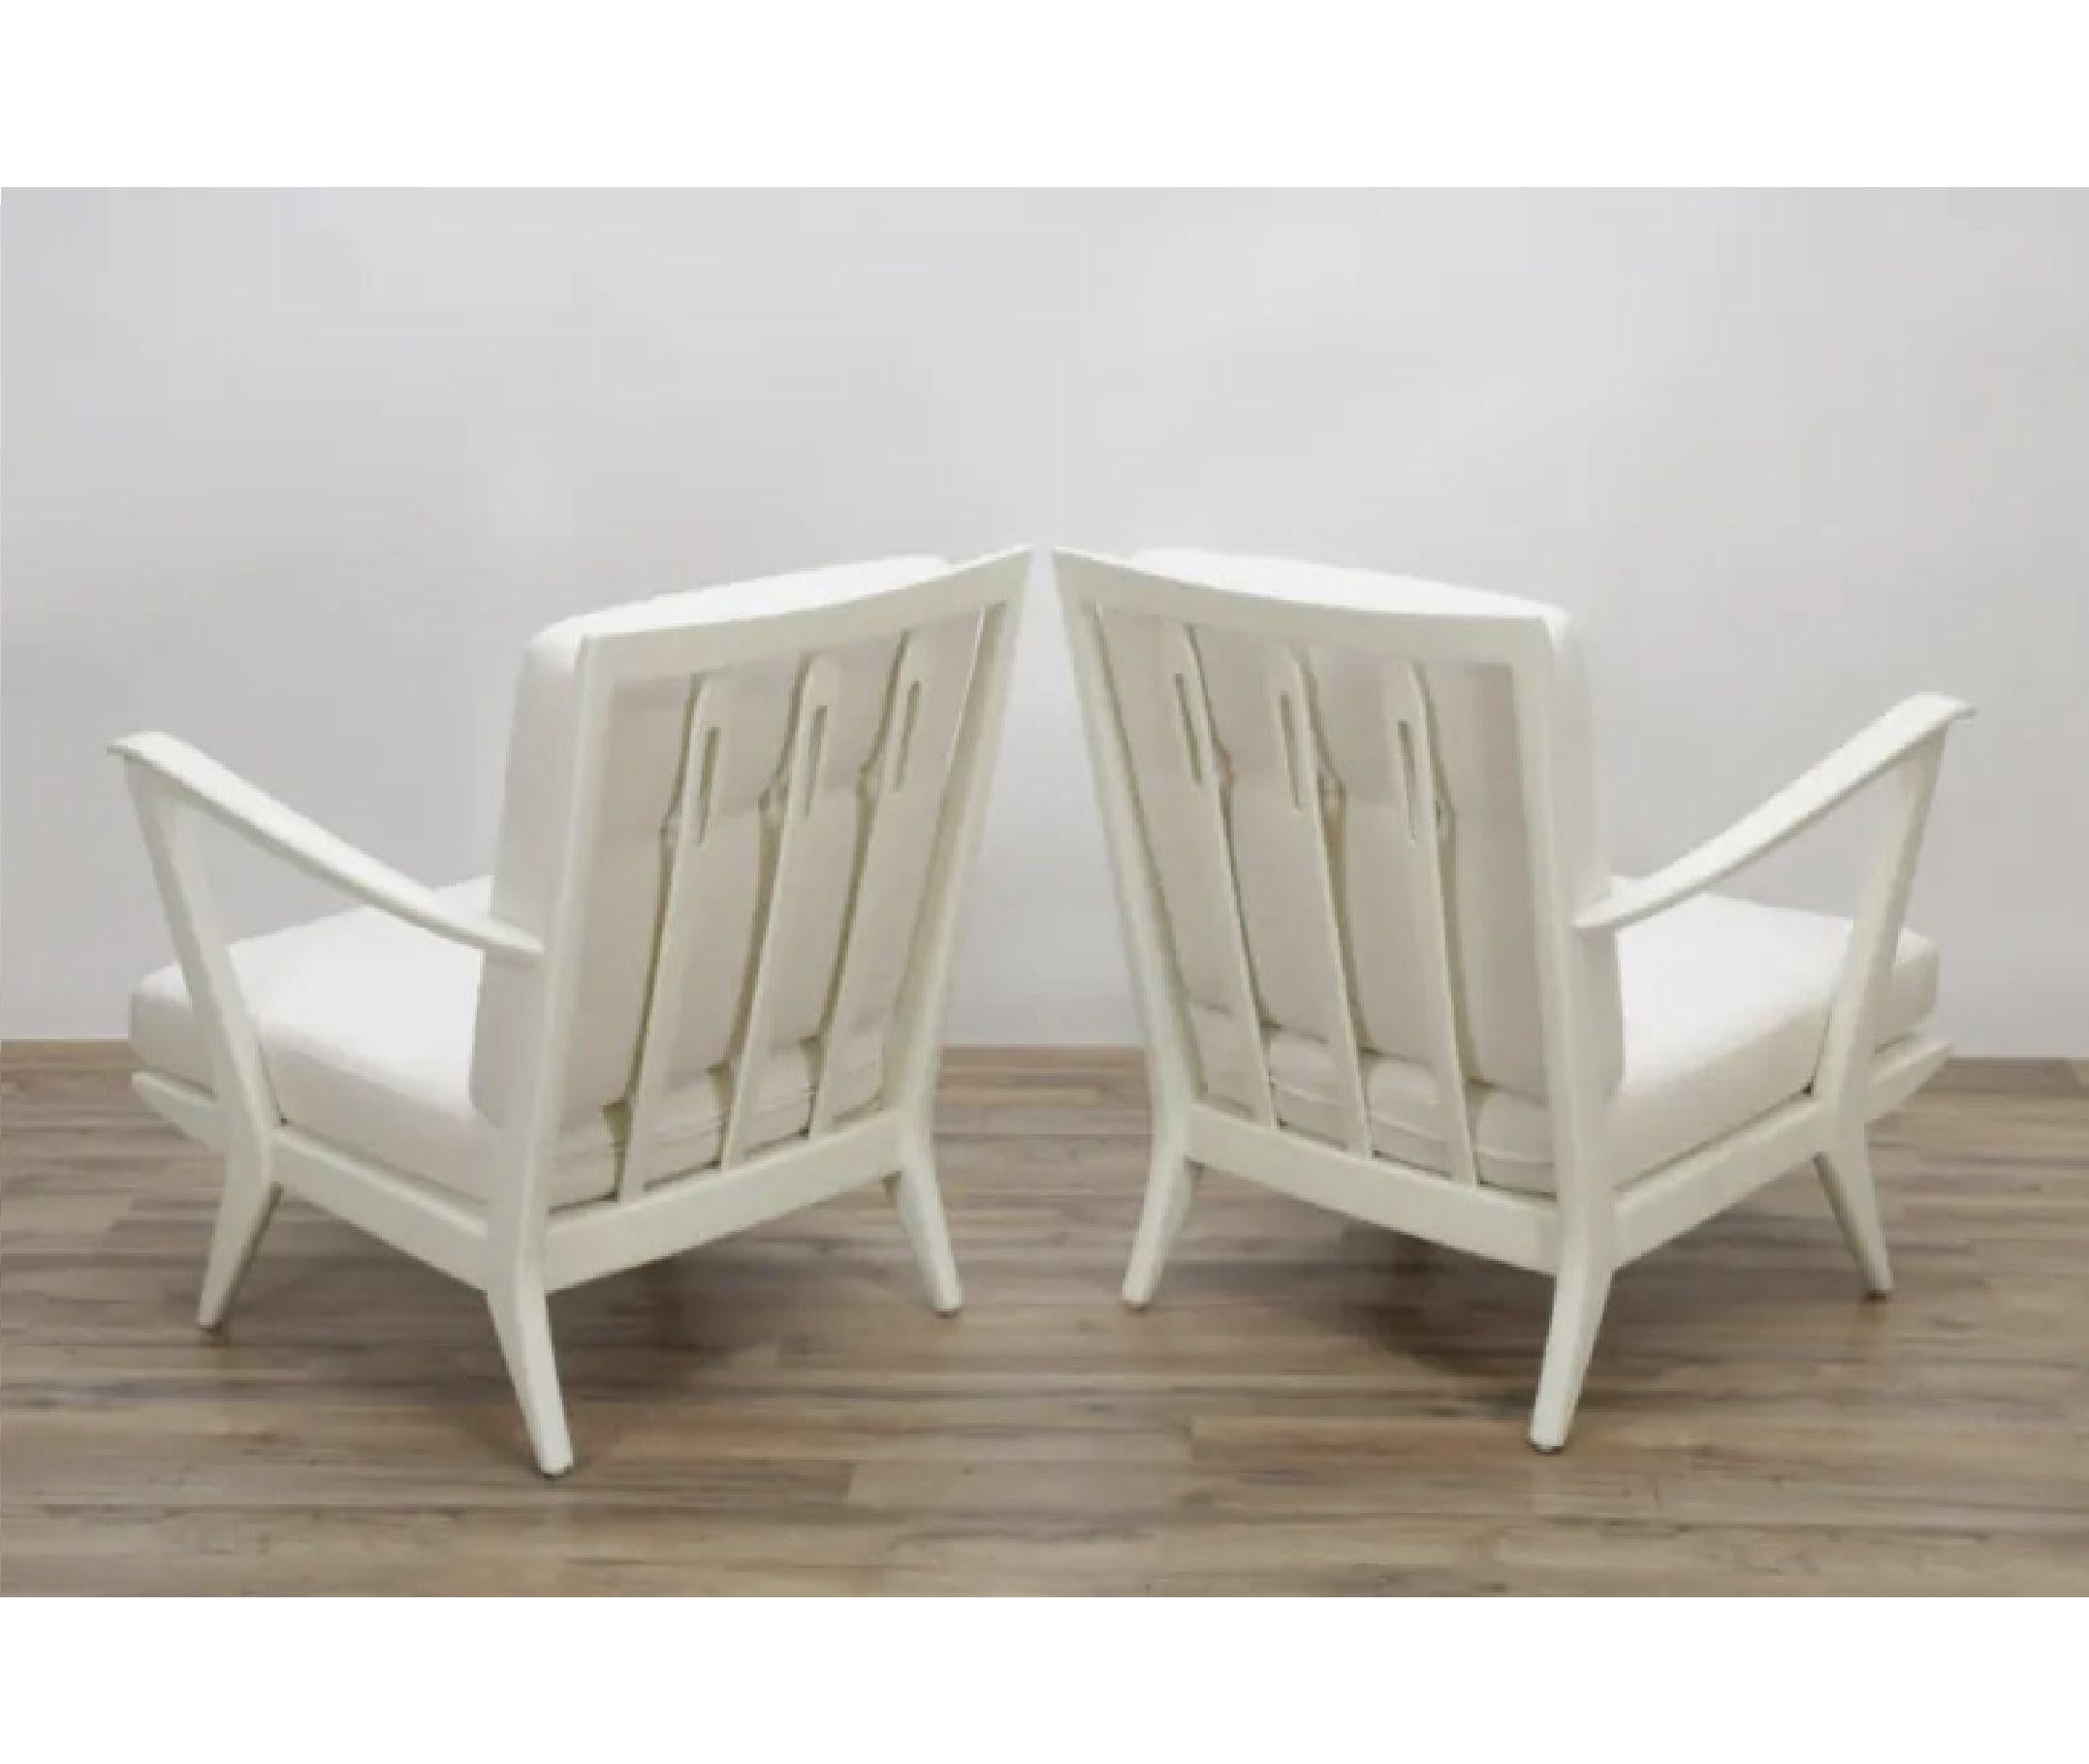 Lacquered Gio Ponti Model 516 Pair of Lounge Chairs, Cream White Painted Walnut, 1950 For Sale